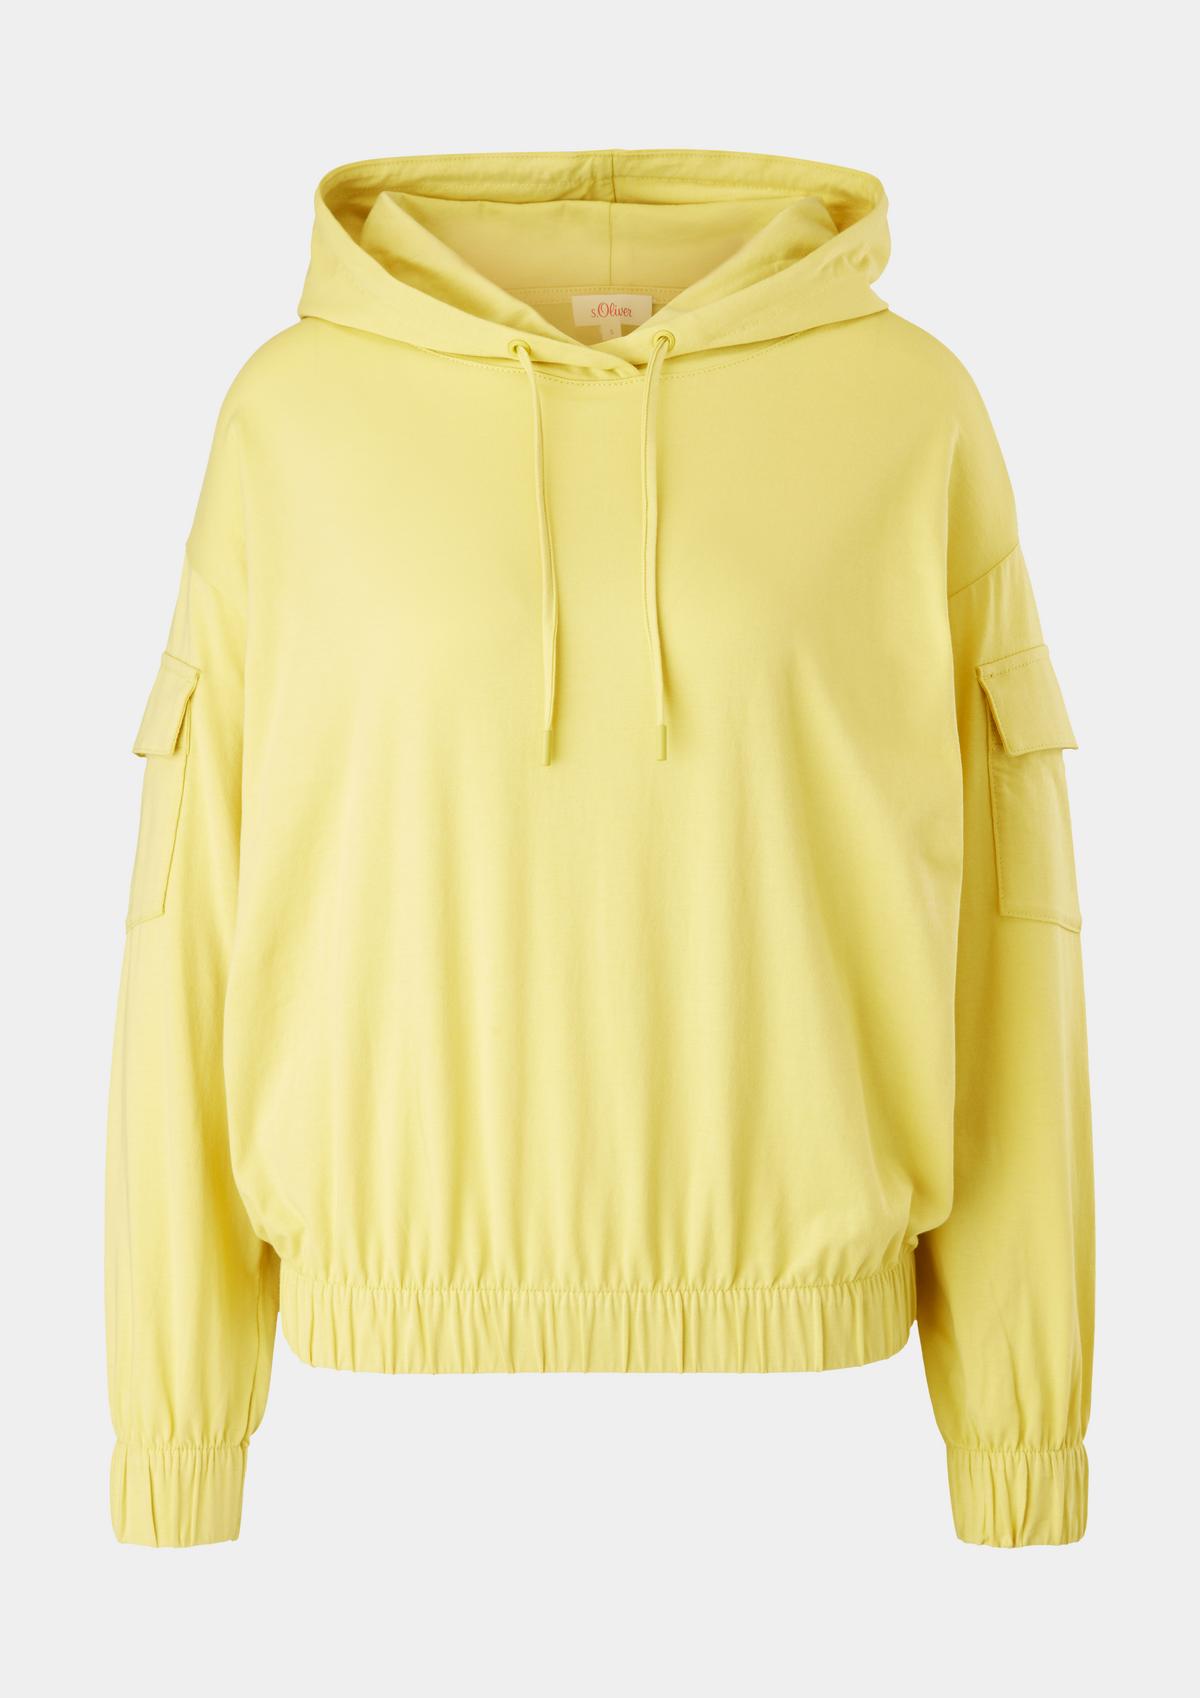 s.Oliver Hooded top with sleeve pockets